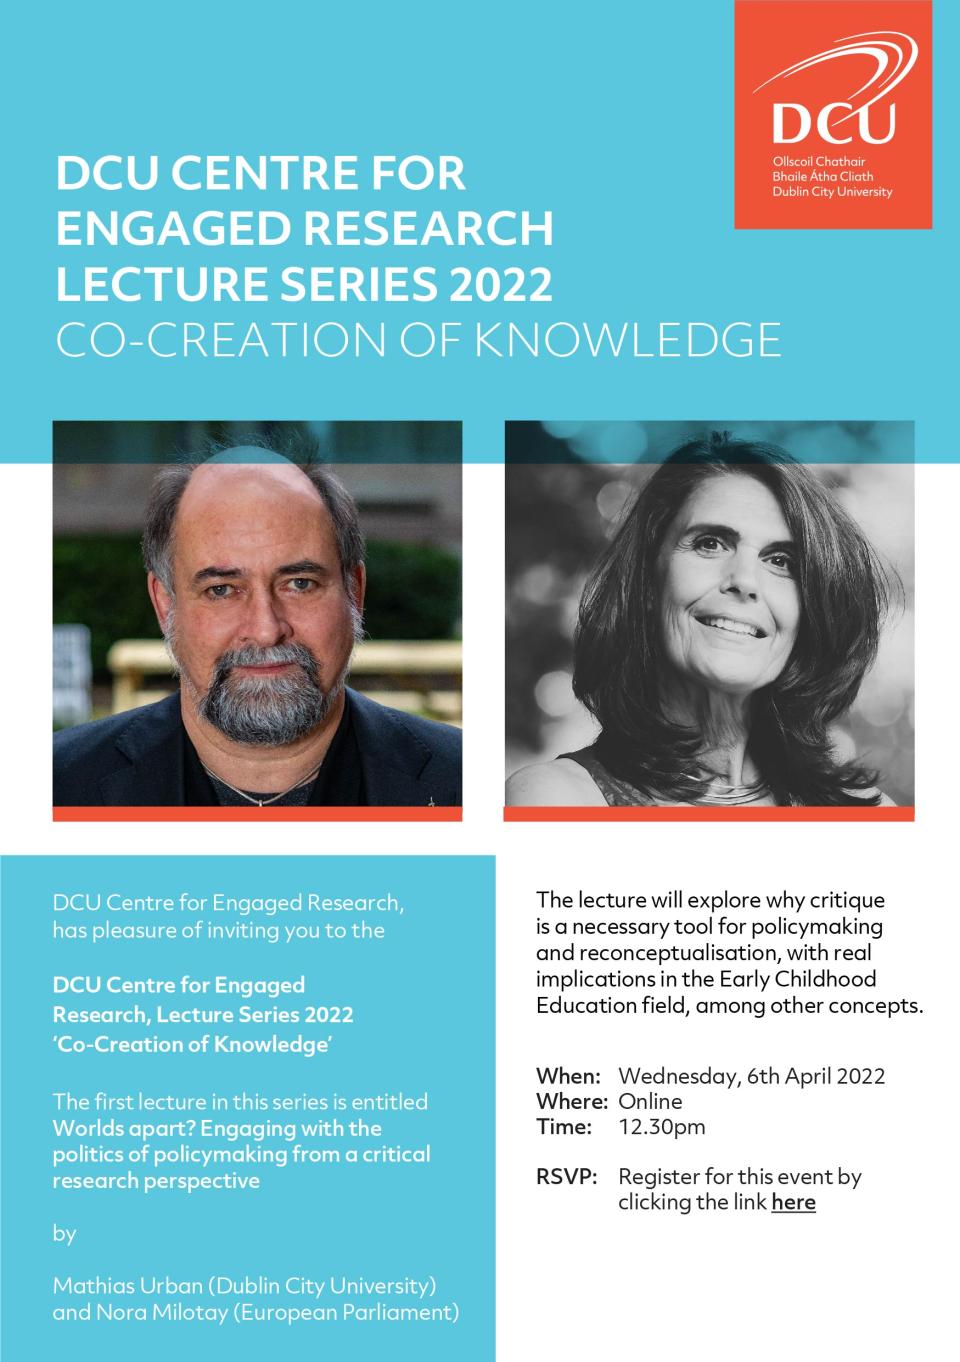 DCU Centre for Engaged Research invite